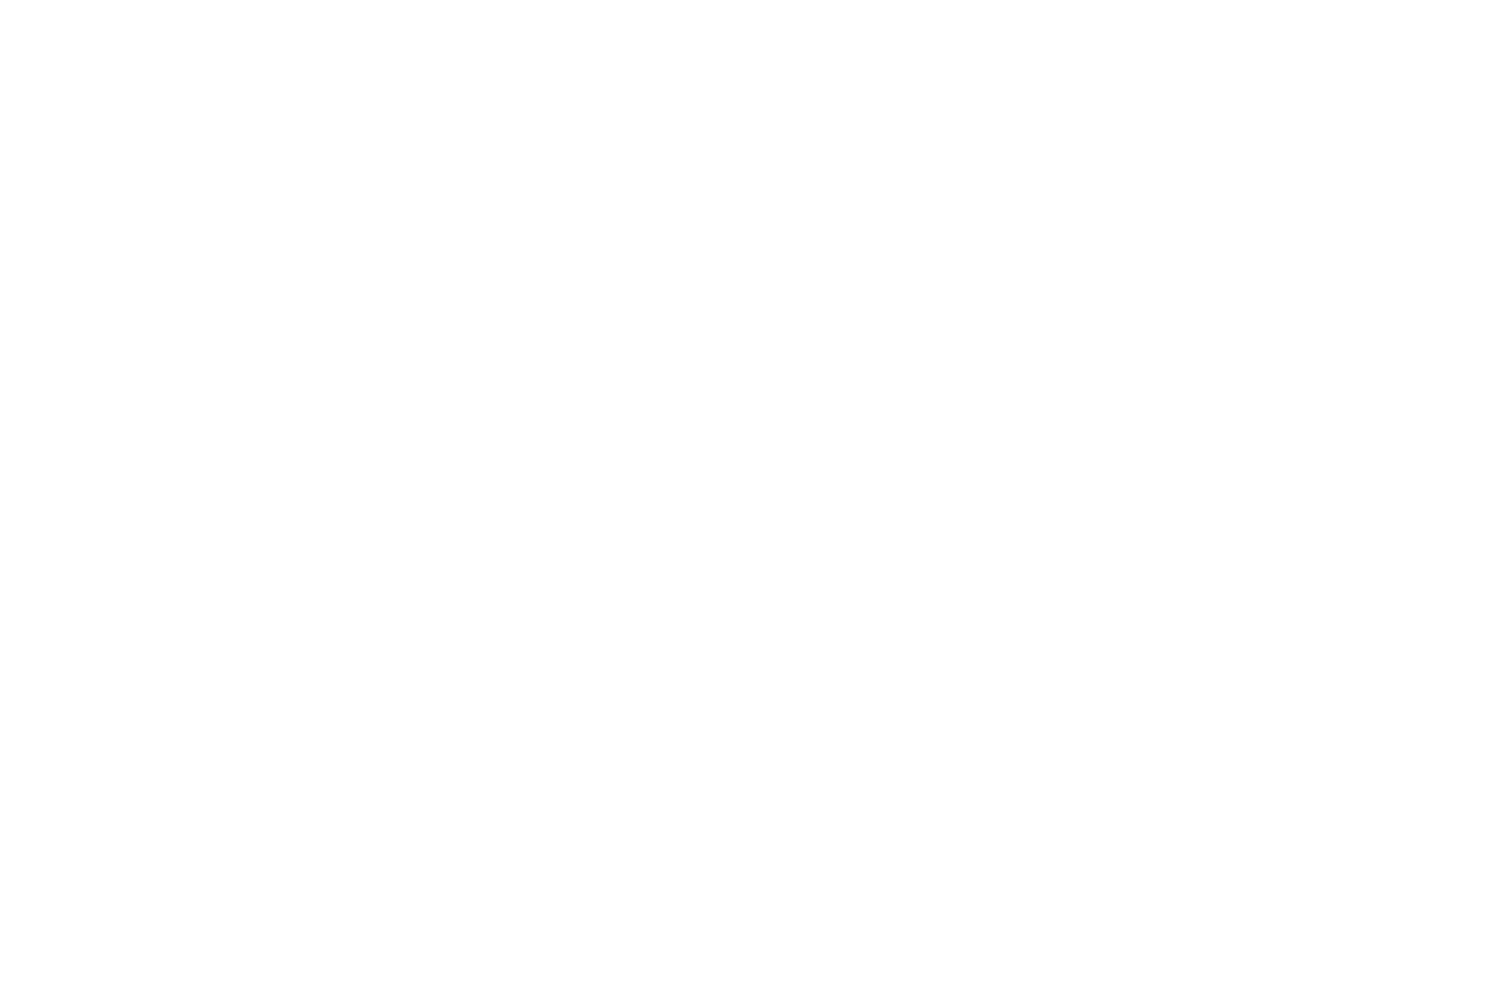 The Law Offices of Suraj A. Vyas, LLC